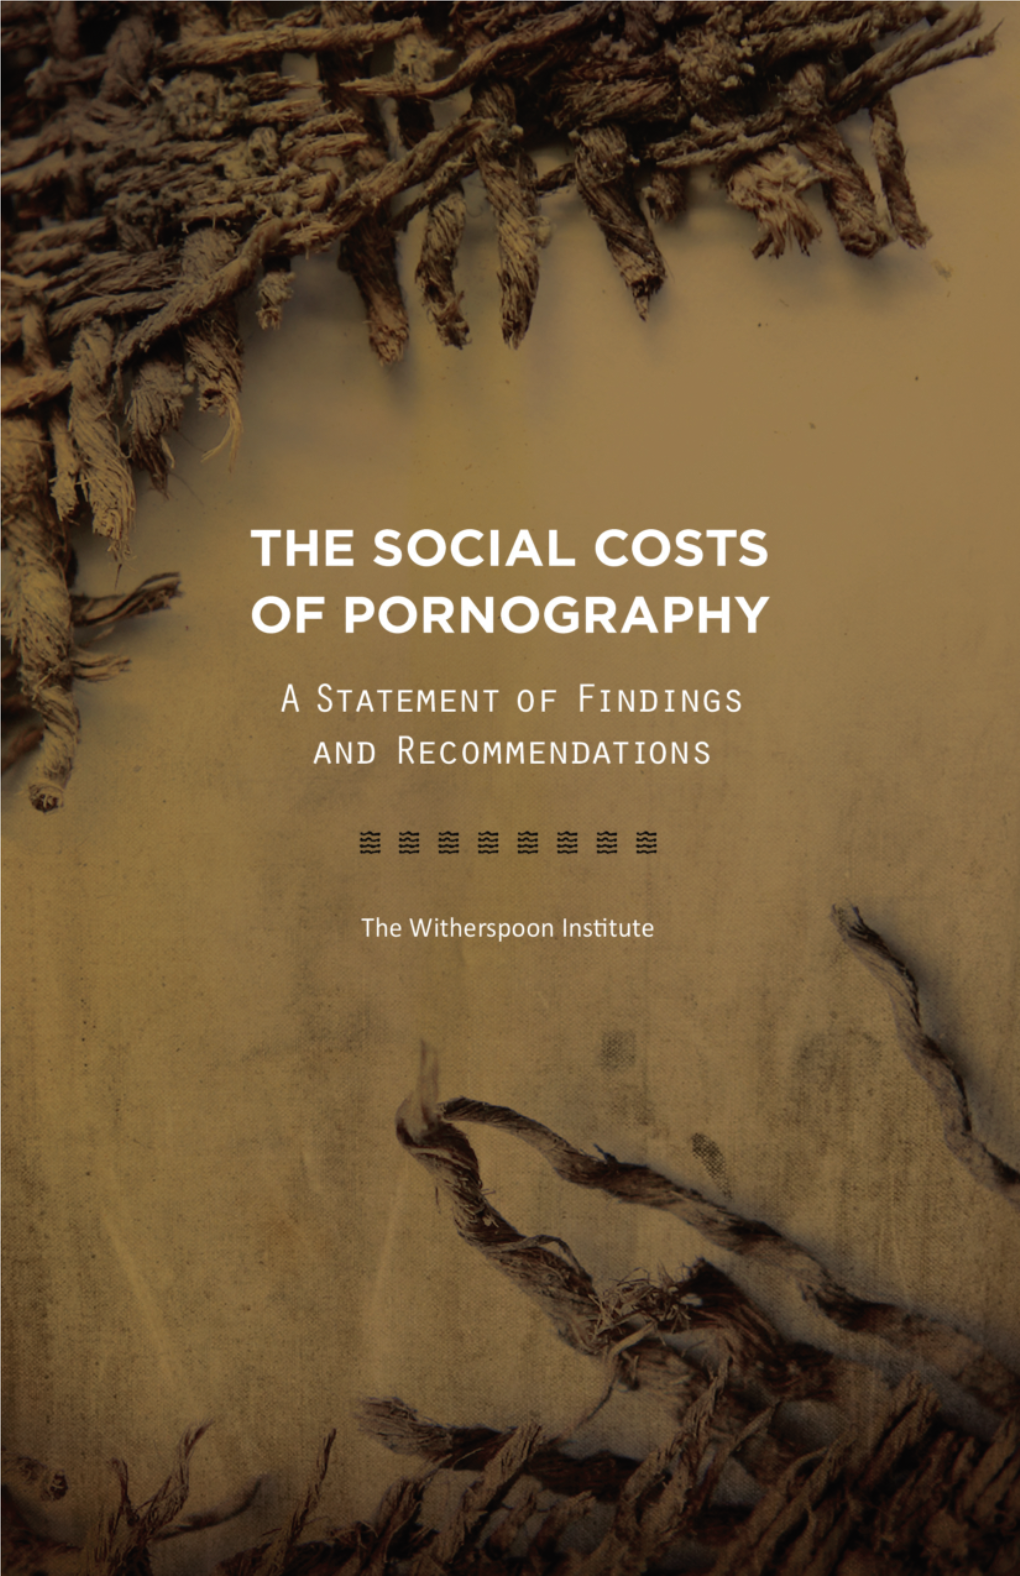 THE Social Costs of Pornography a Statement of Findings and Recommendations